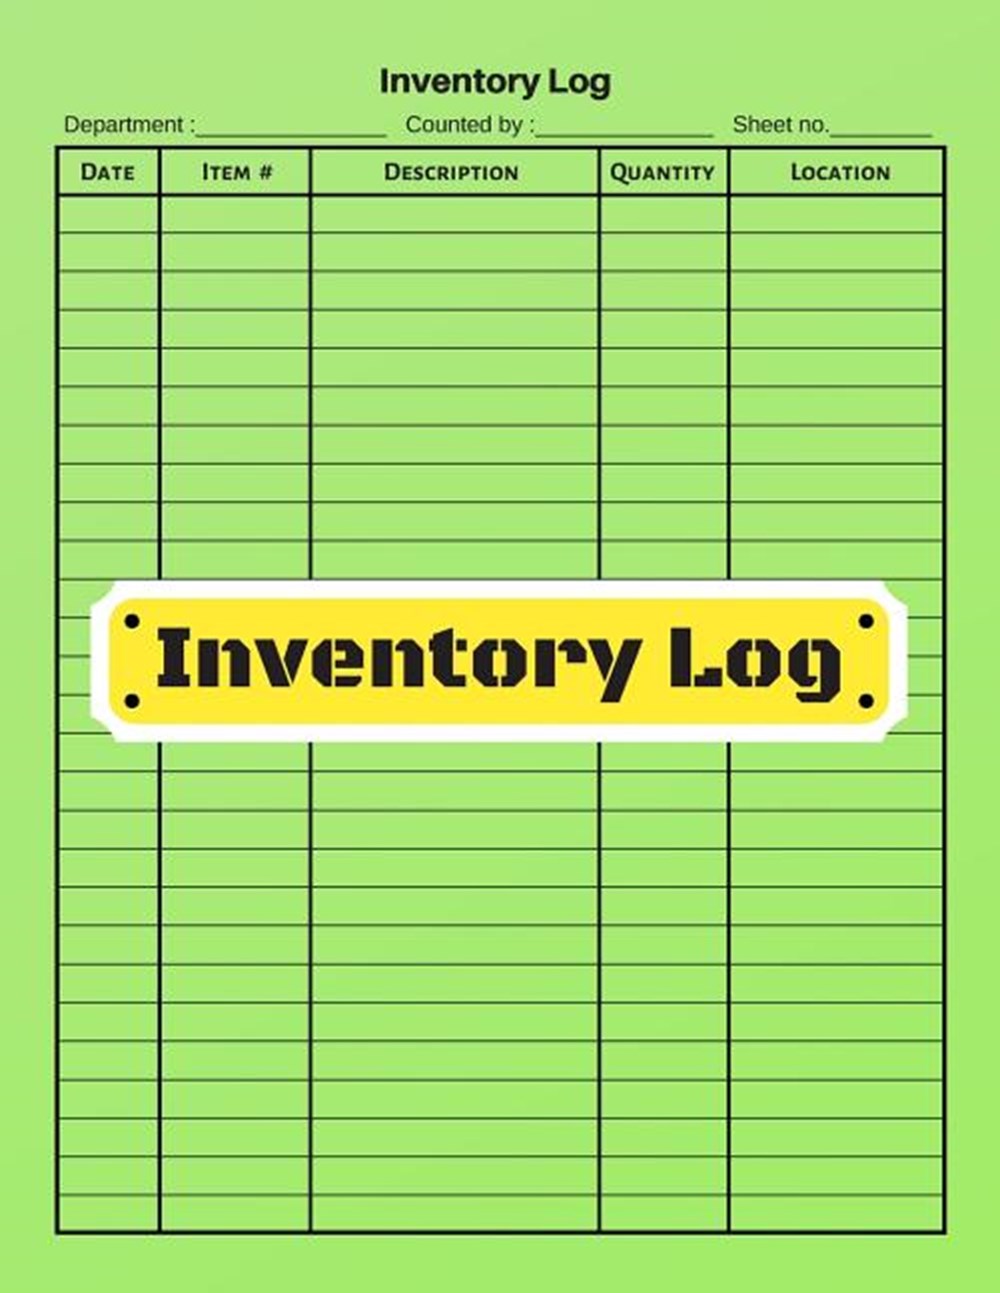 Inventory log V.9 - Inventory Tracking Book, Inventory Management and Control, Small Business Bookke